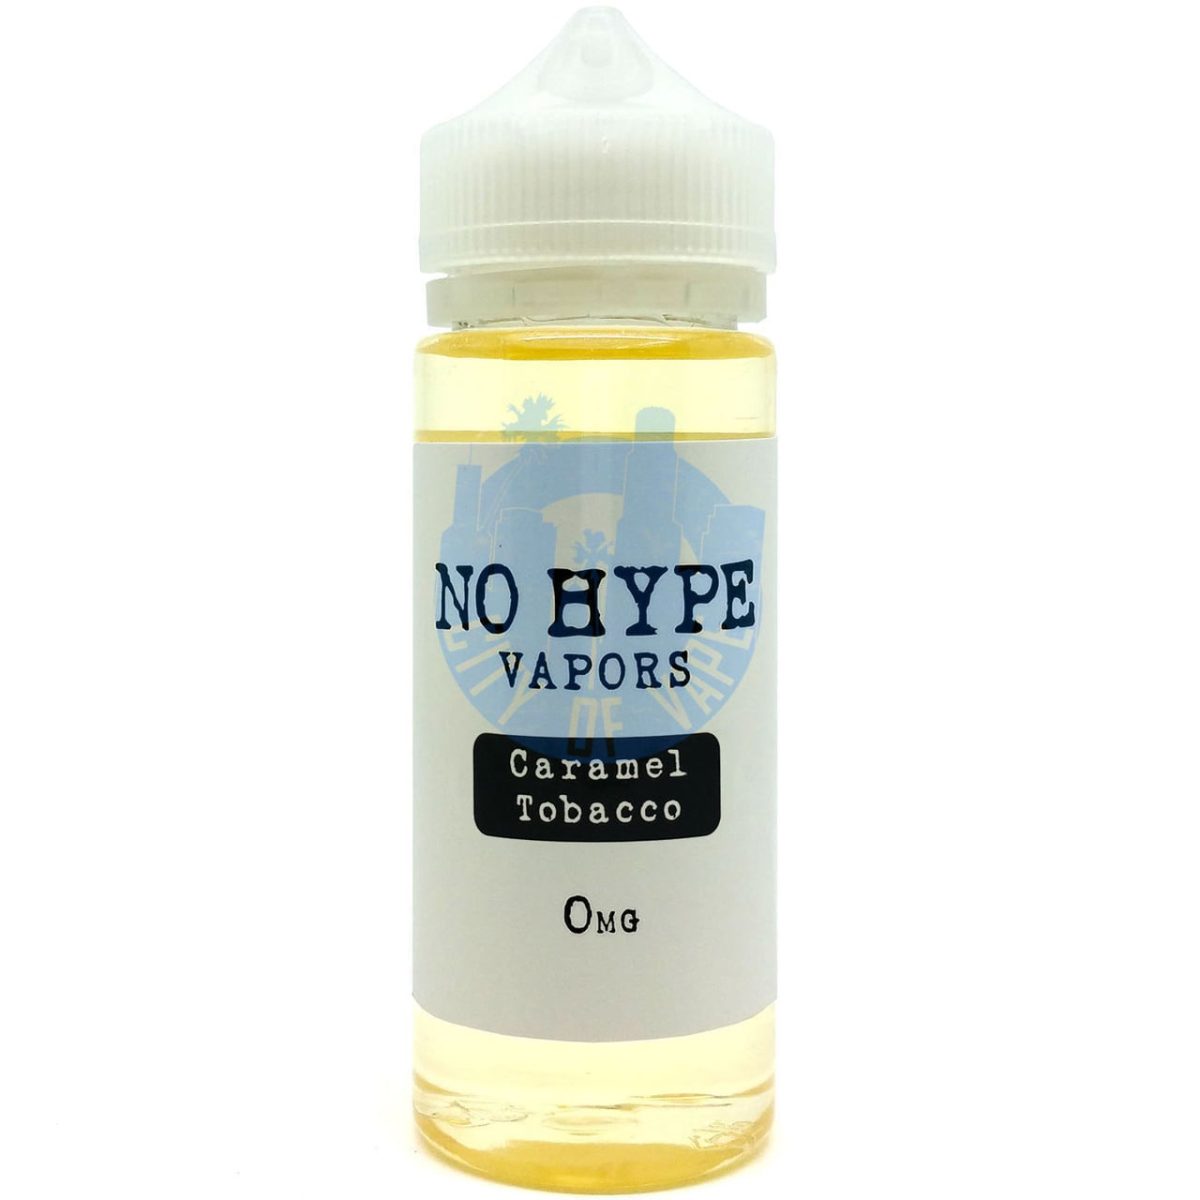 CARANEL TOBACCO BY NO HYPE VAPORS 120ML